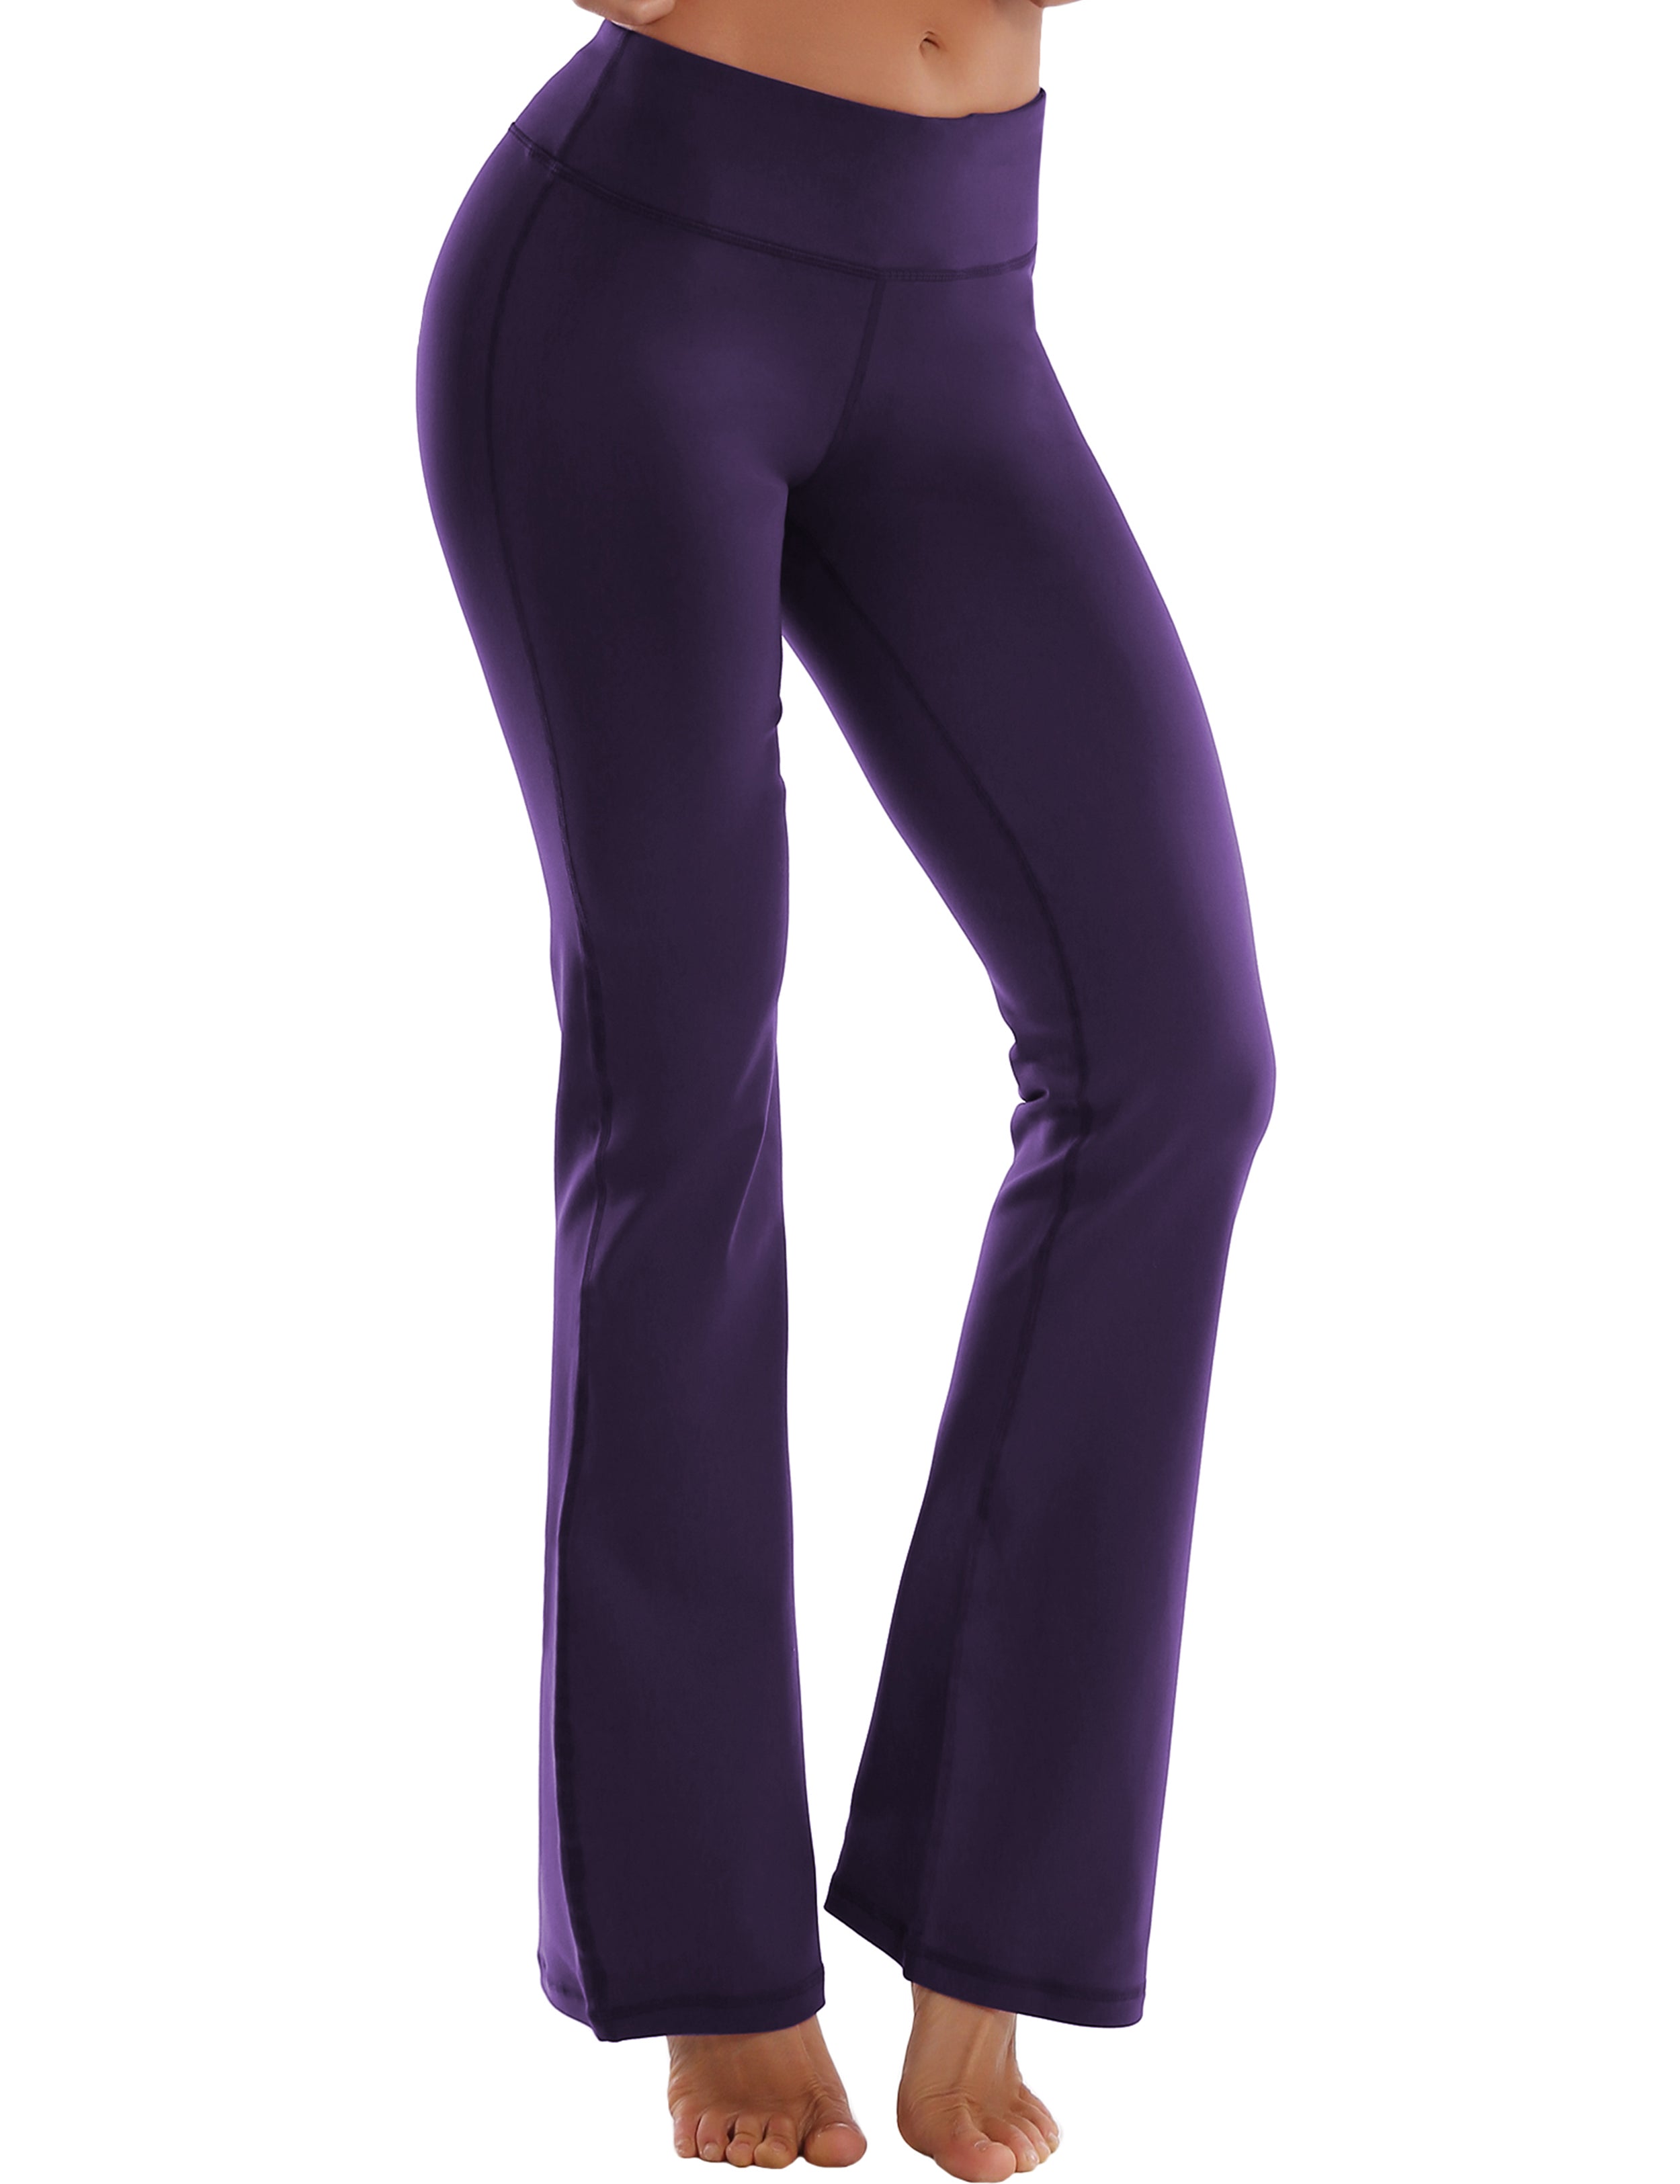 Cotton Nylon Bootcut Leggings darkpurple 87%Nylon/13%Spandex (Super soft, cotton feel , 280gsm) Fabric doesn't attract lint easily 4-way stretch No see-through Moisture-wicking Inner pocket Four lengths